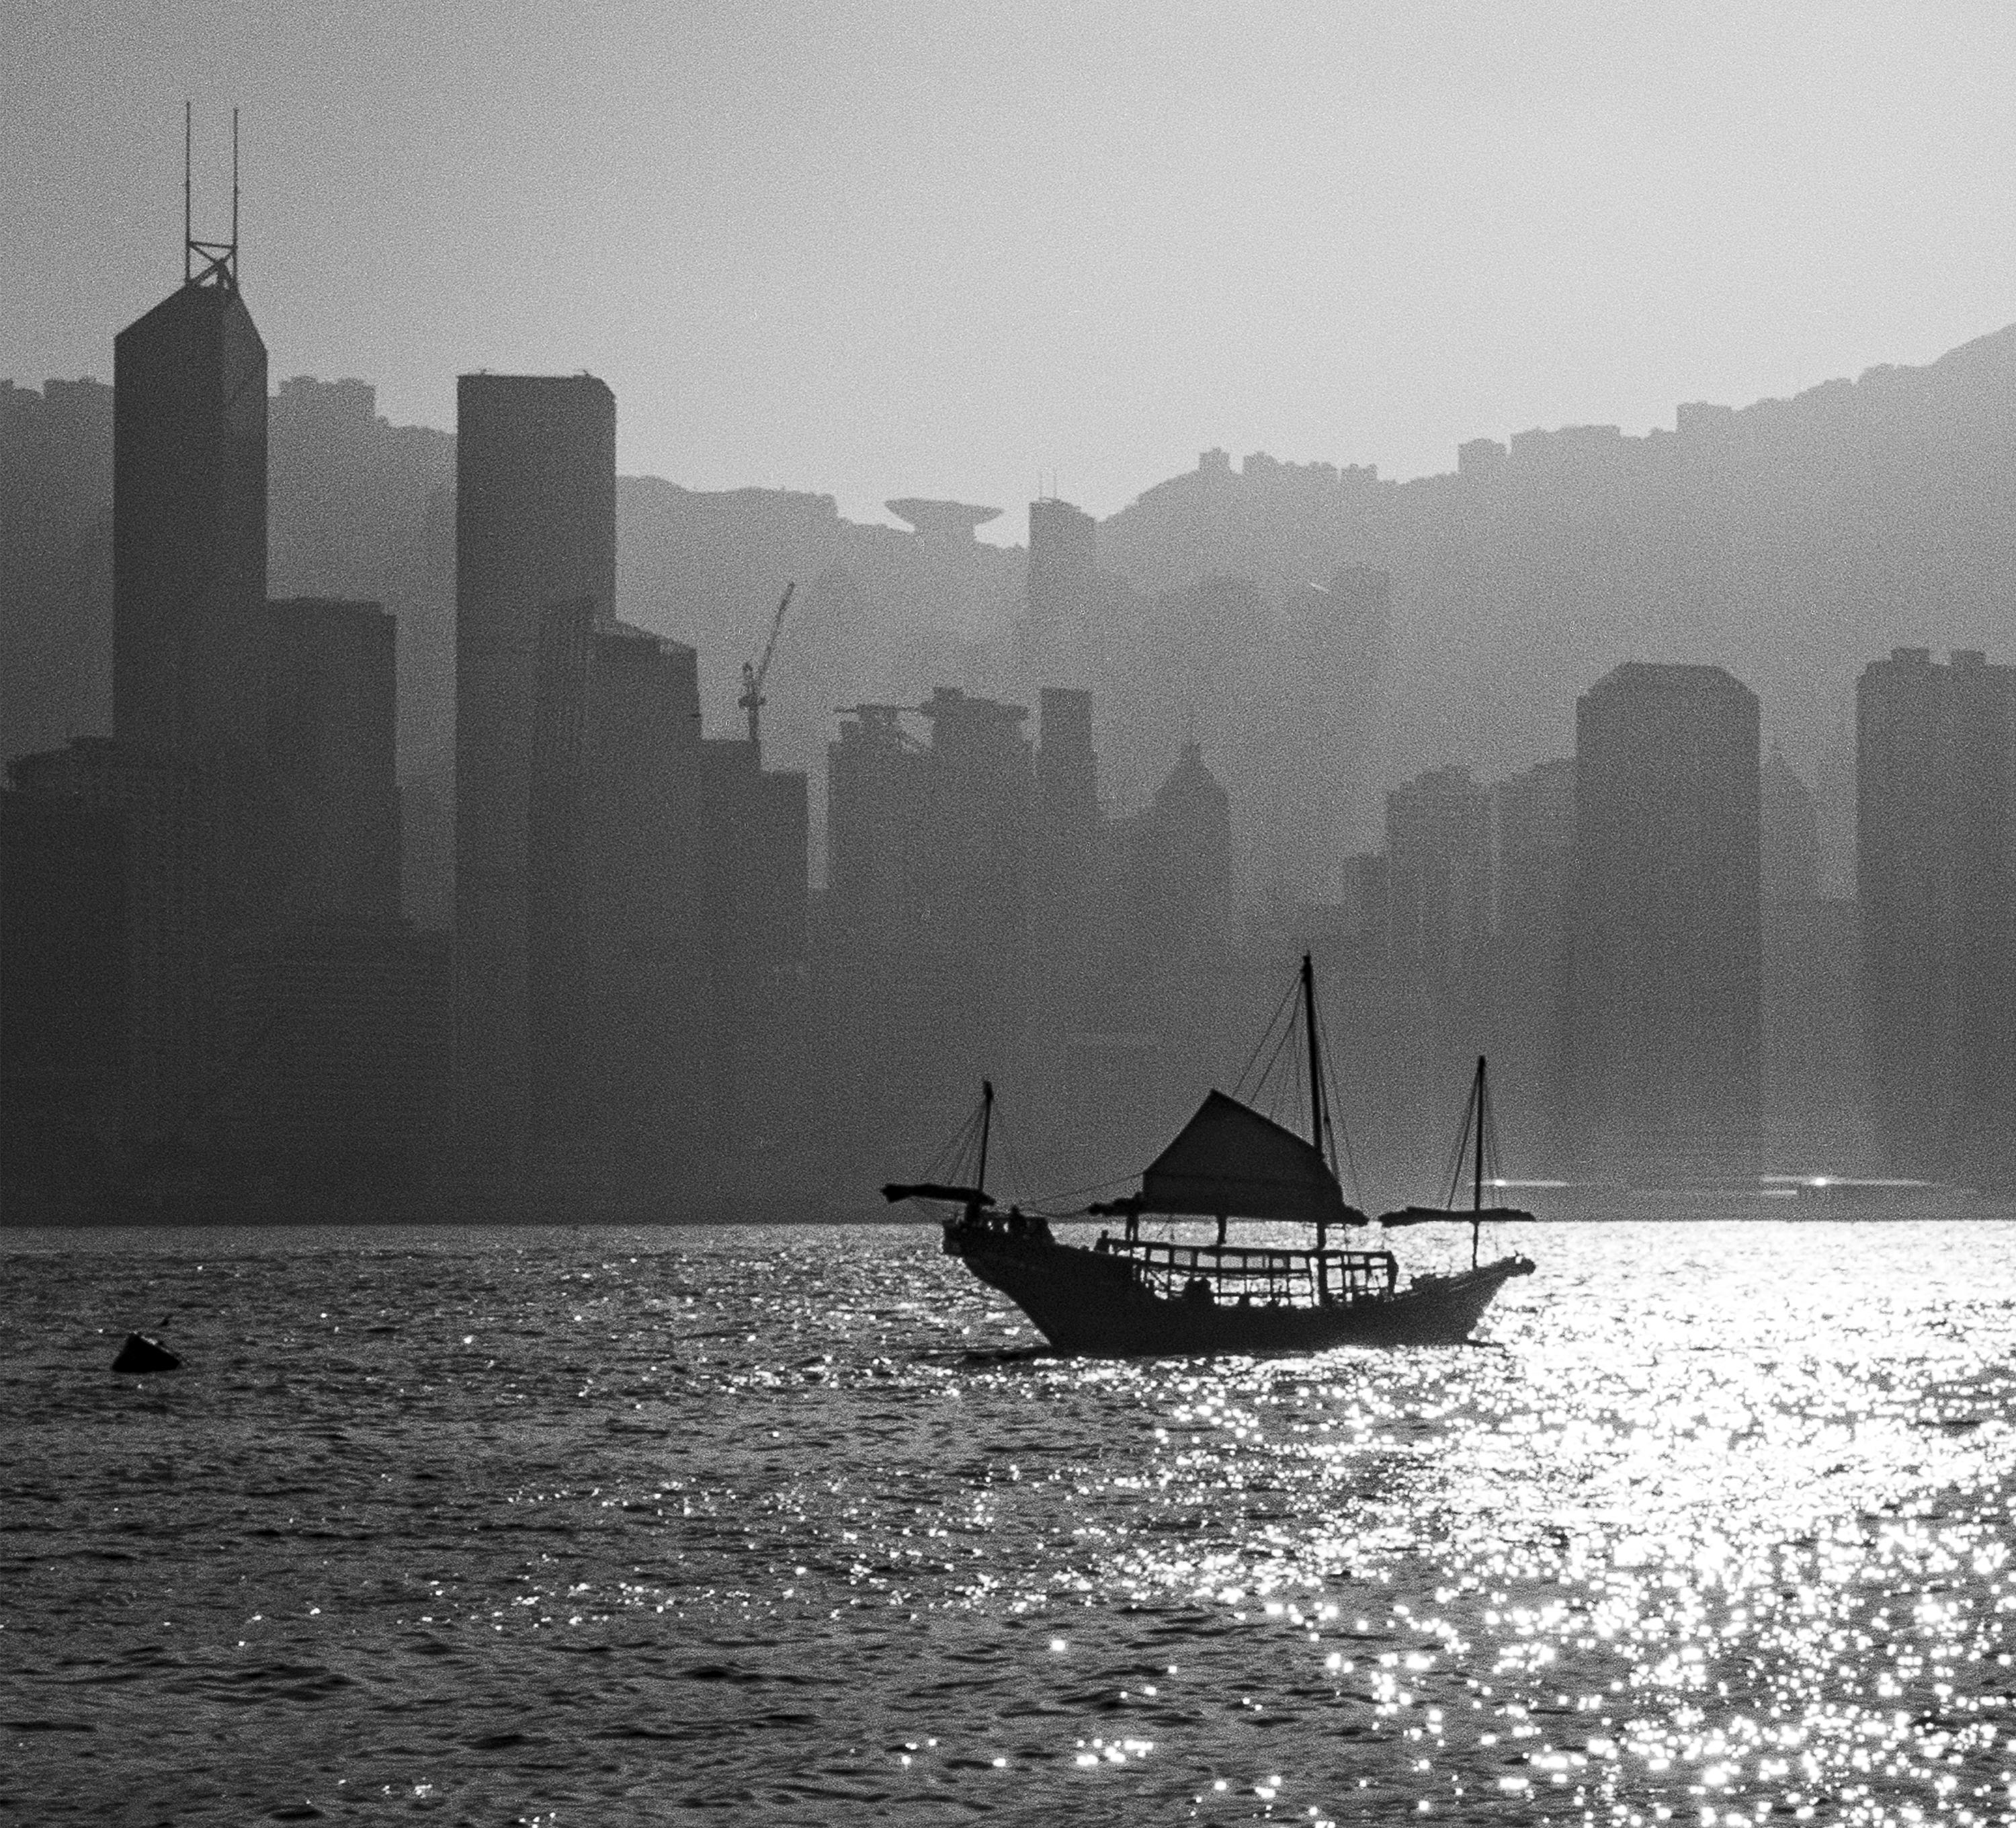 Hong Kong - black and white photograph - archival pigment print 24